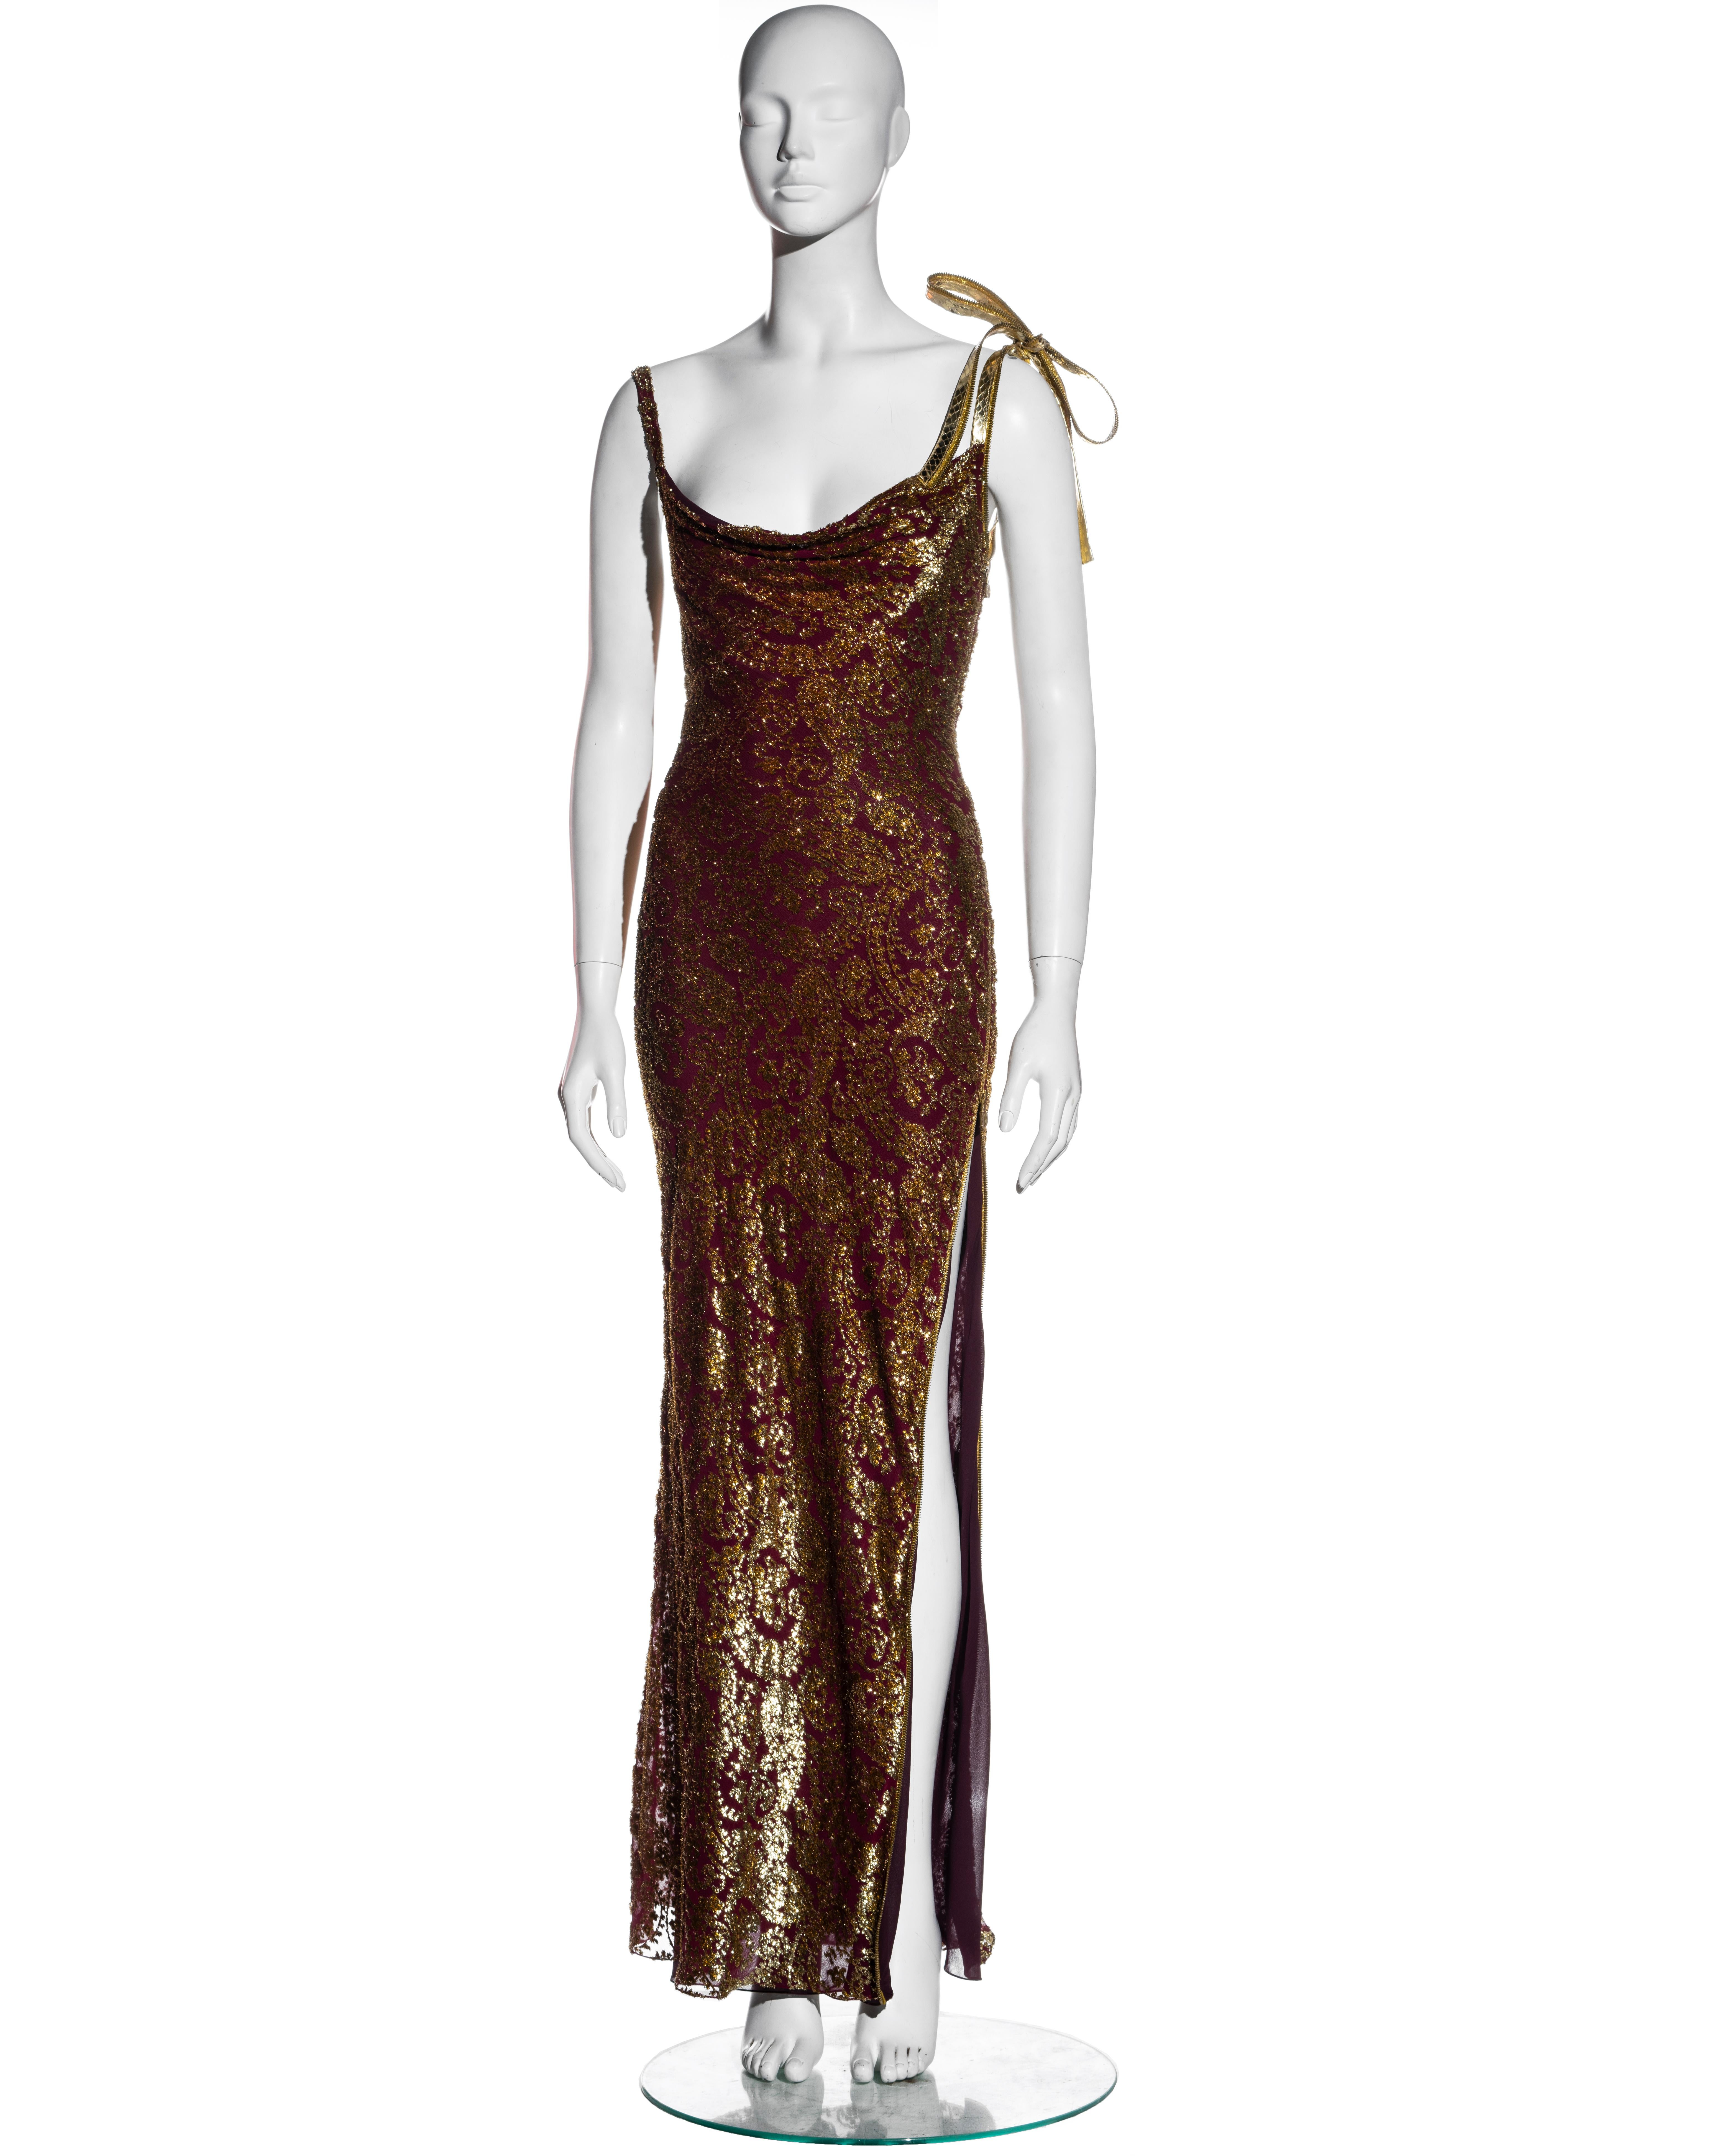 ▪ Christian Dior gold and burgundy lurex silk devoré evening dress
▪ Designed by John Galliano
▪ Cowl neckline 
▪ Metallic gold snakeskin shoulder strap with a bow
▪ Double-ended zipper at side seam which can be opened to create a leg slit 
▪ Silk